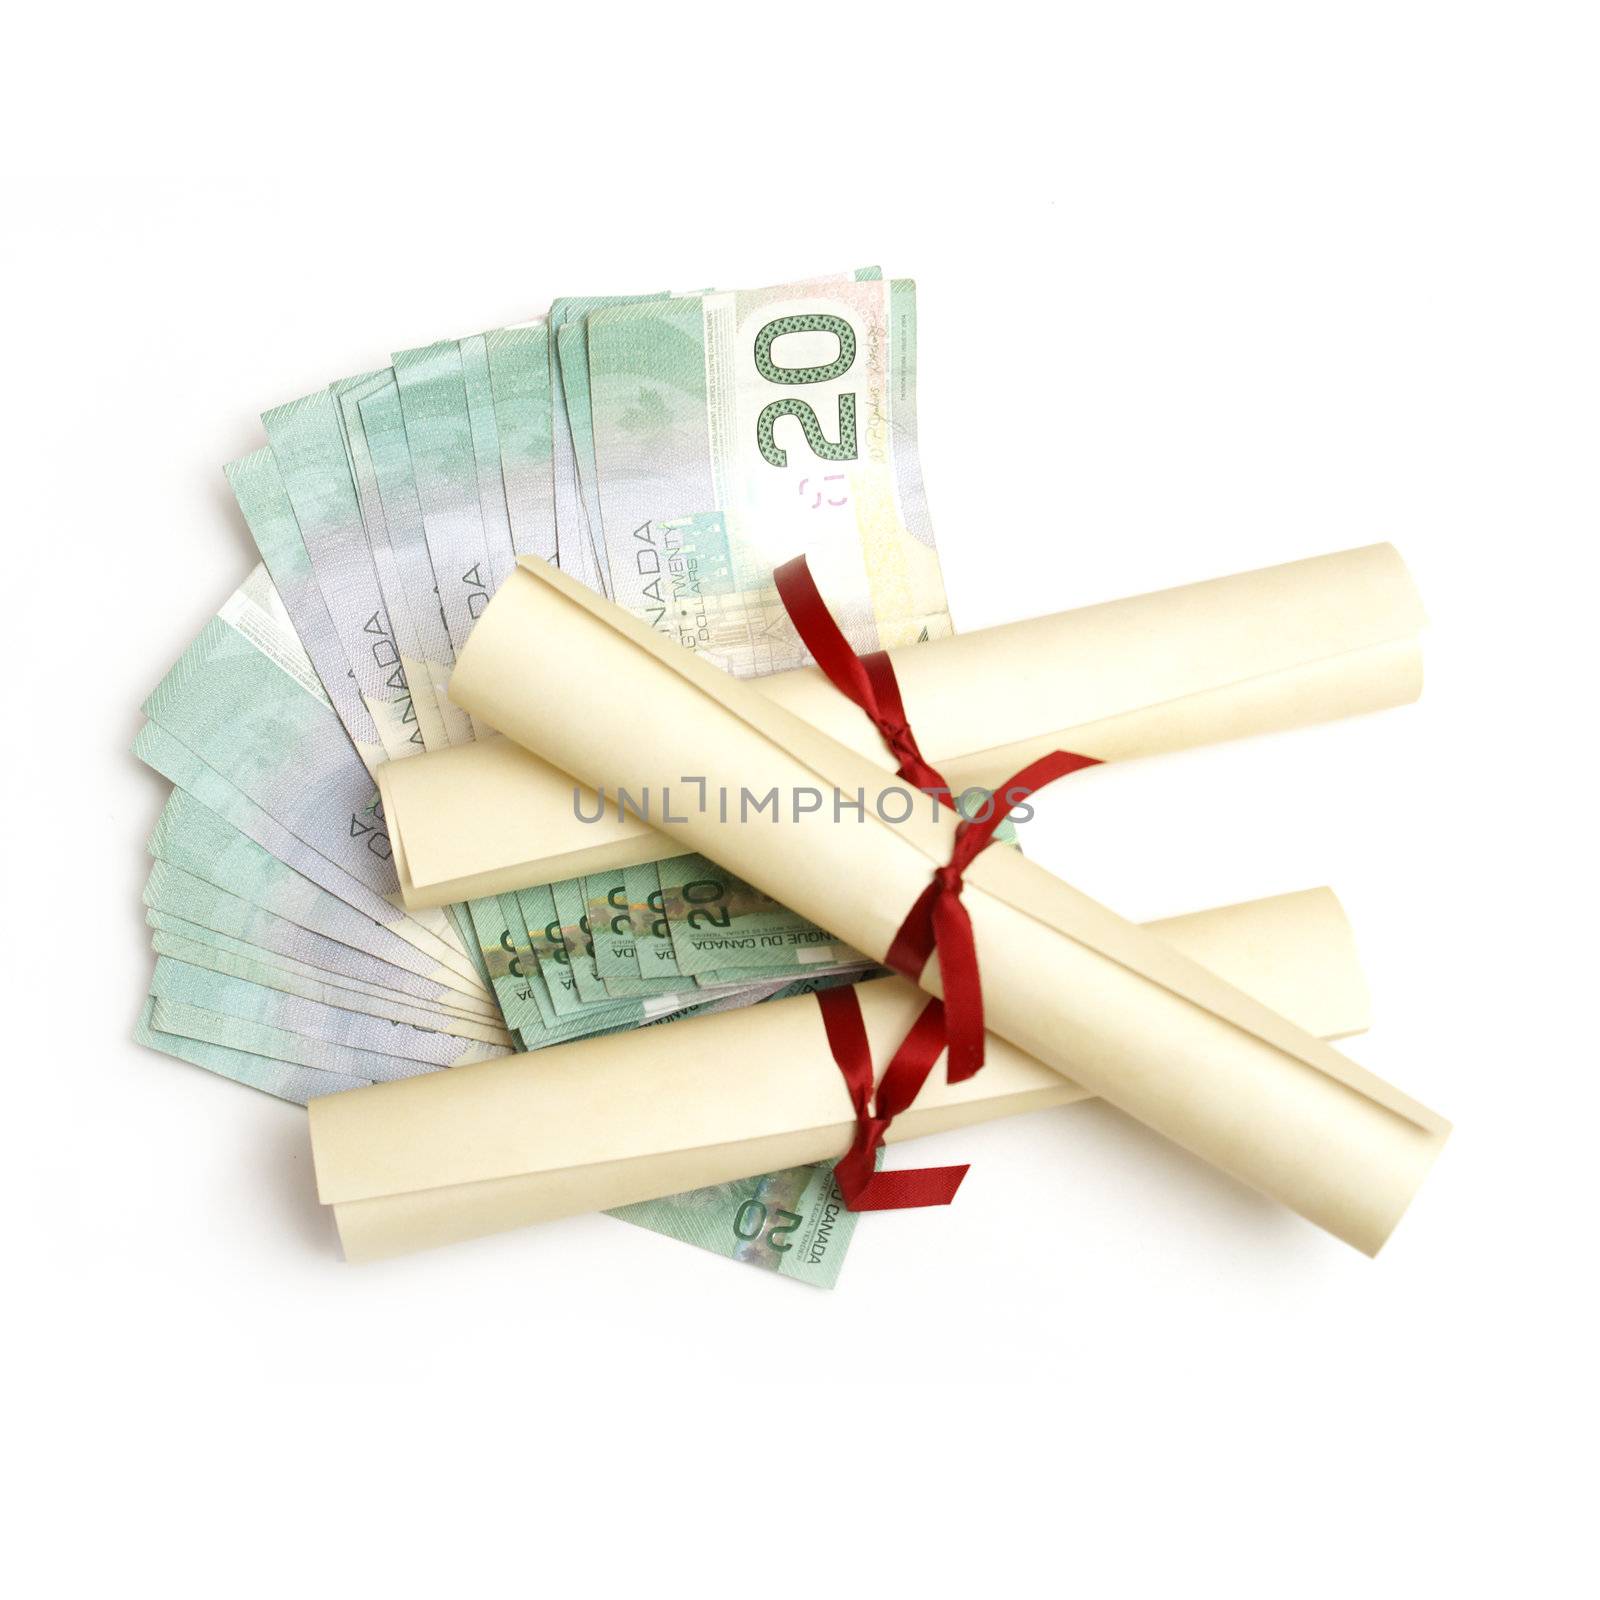 A few diplomas with spread out money for an education or tuition fee concept.